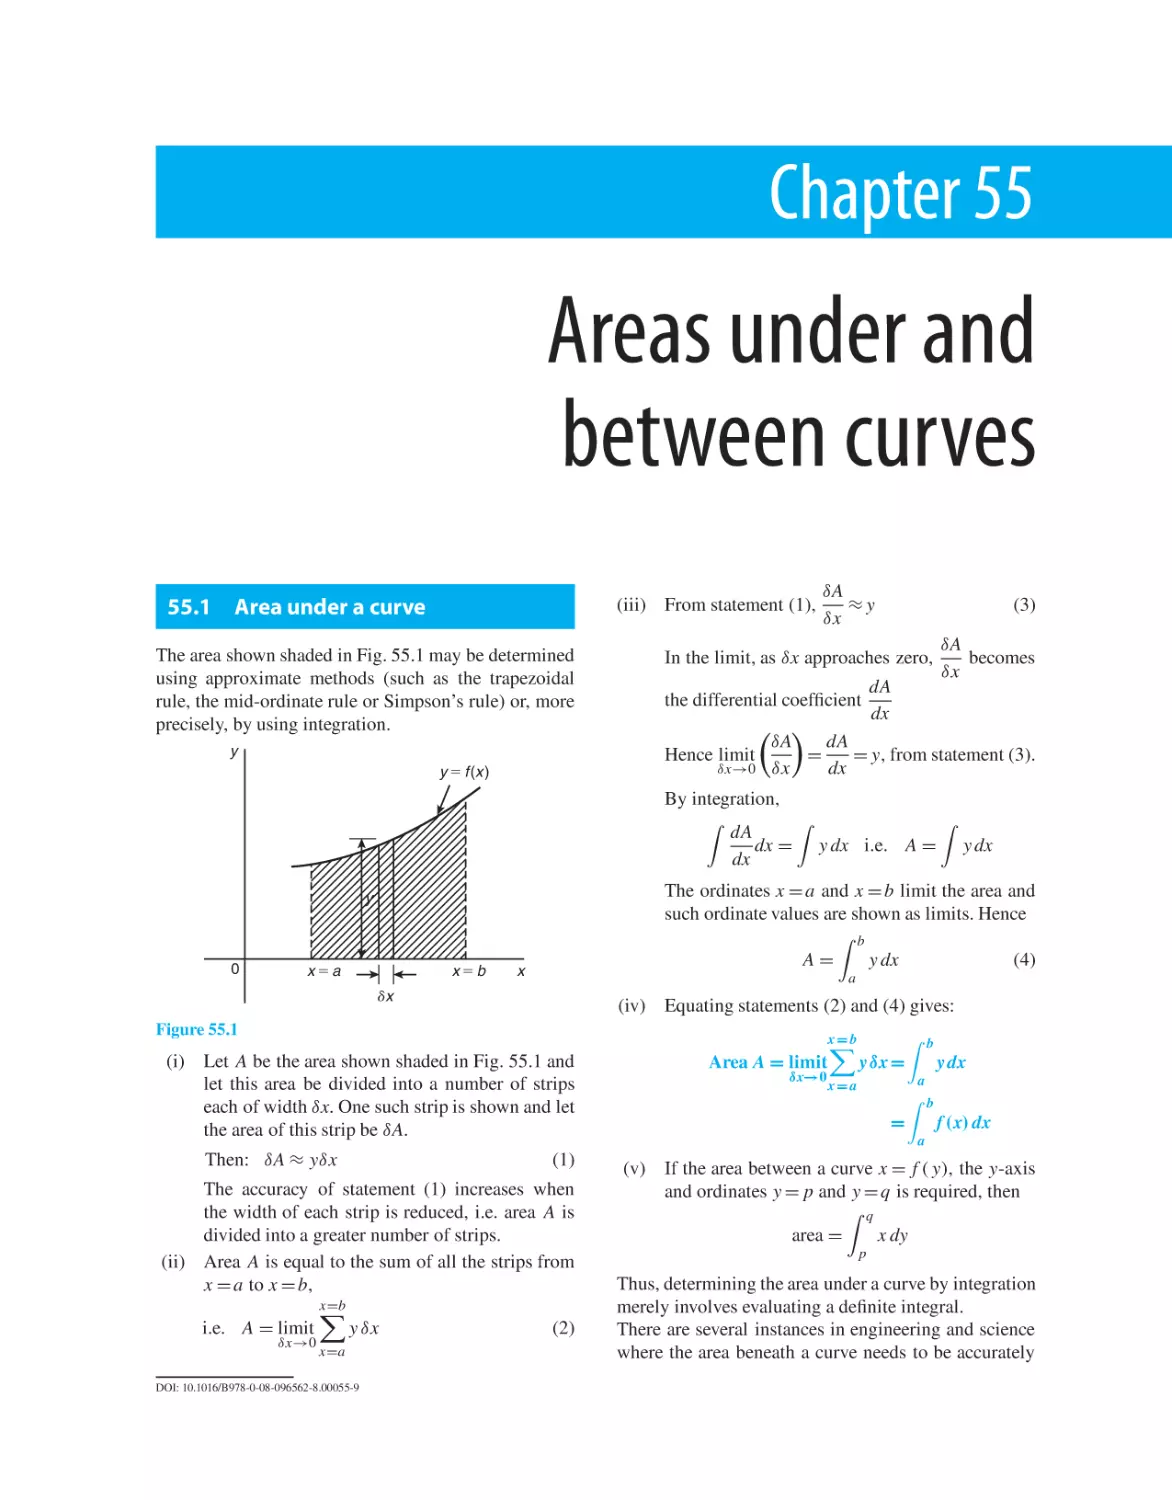 Chapter 55. Areas under and between curves
55.1 Area under a curve